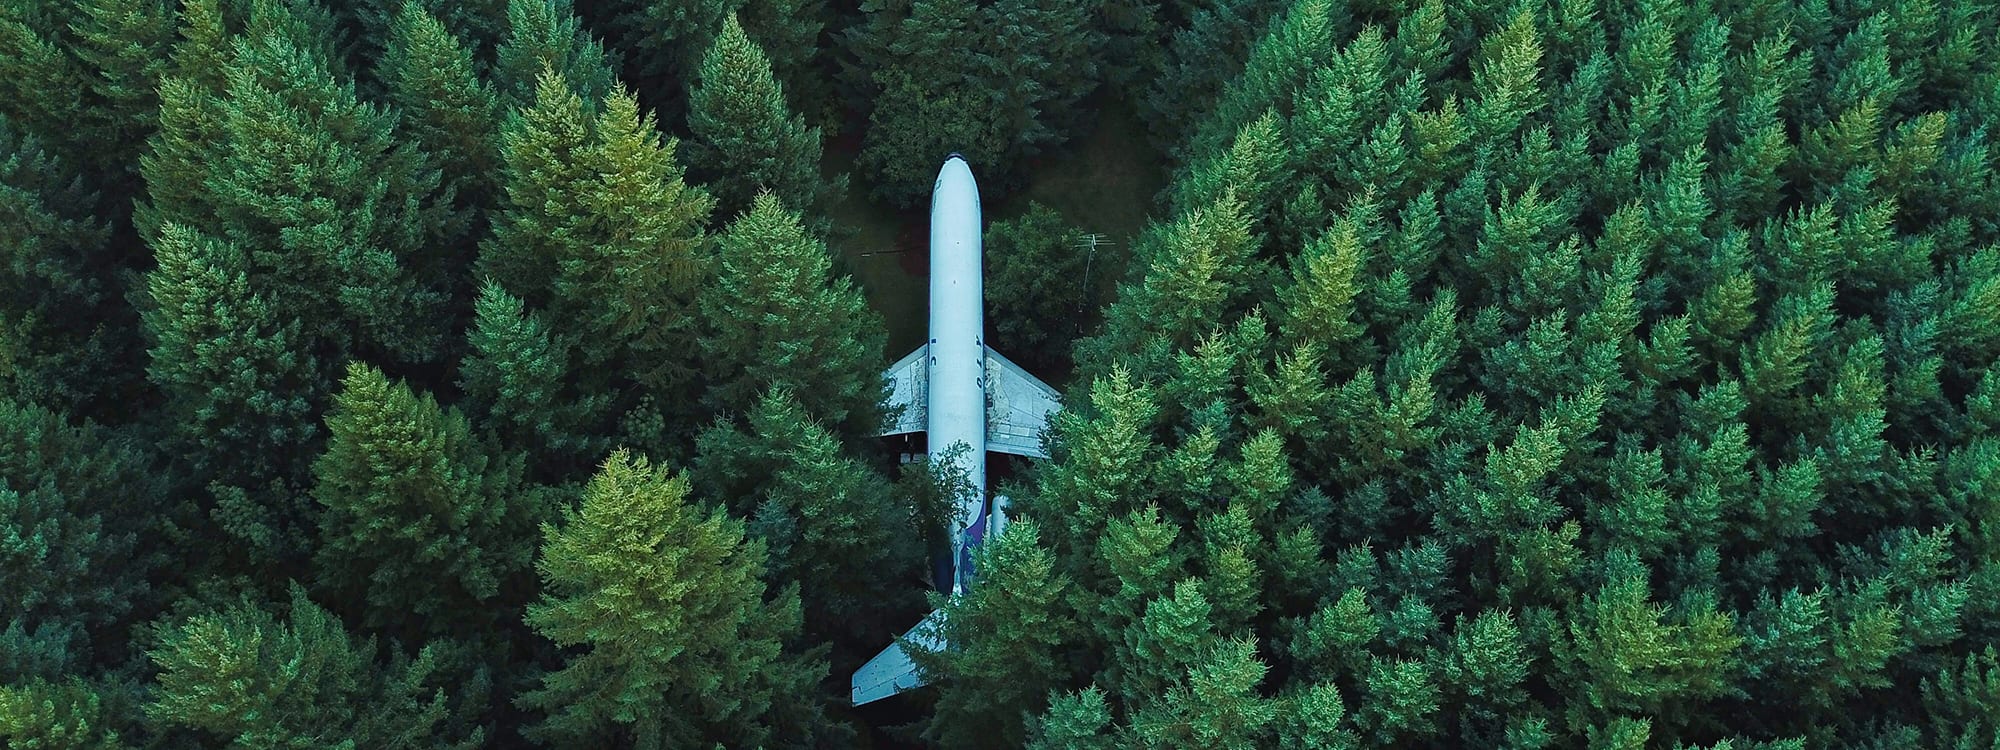 The case study of an aircraft crash in a dense forest studied during Southpac’s Aircraft Accident Investigation Course aids in improving safety performances for the industry.